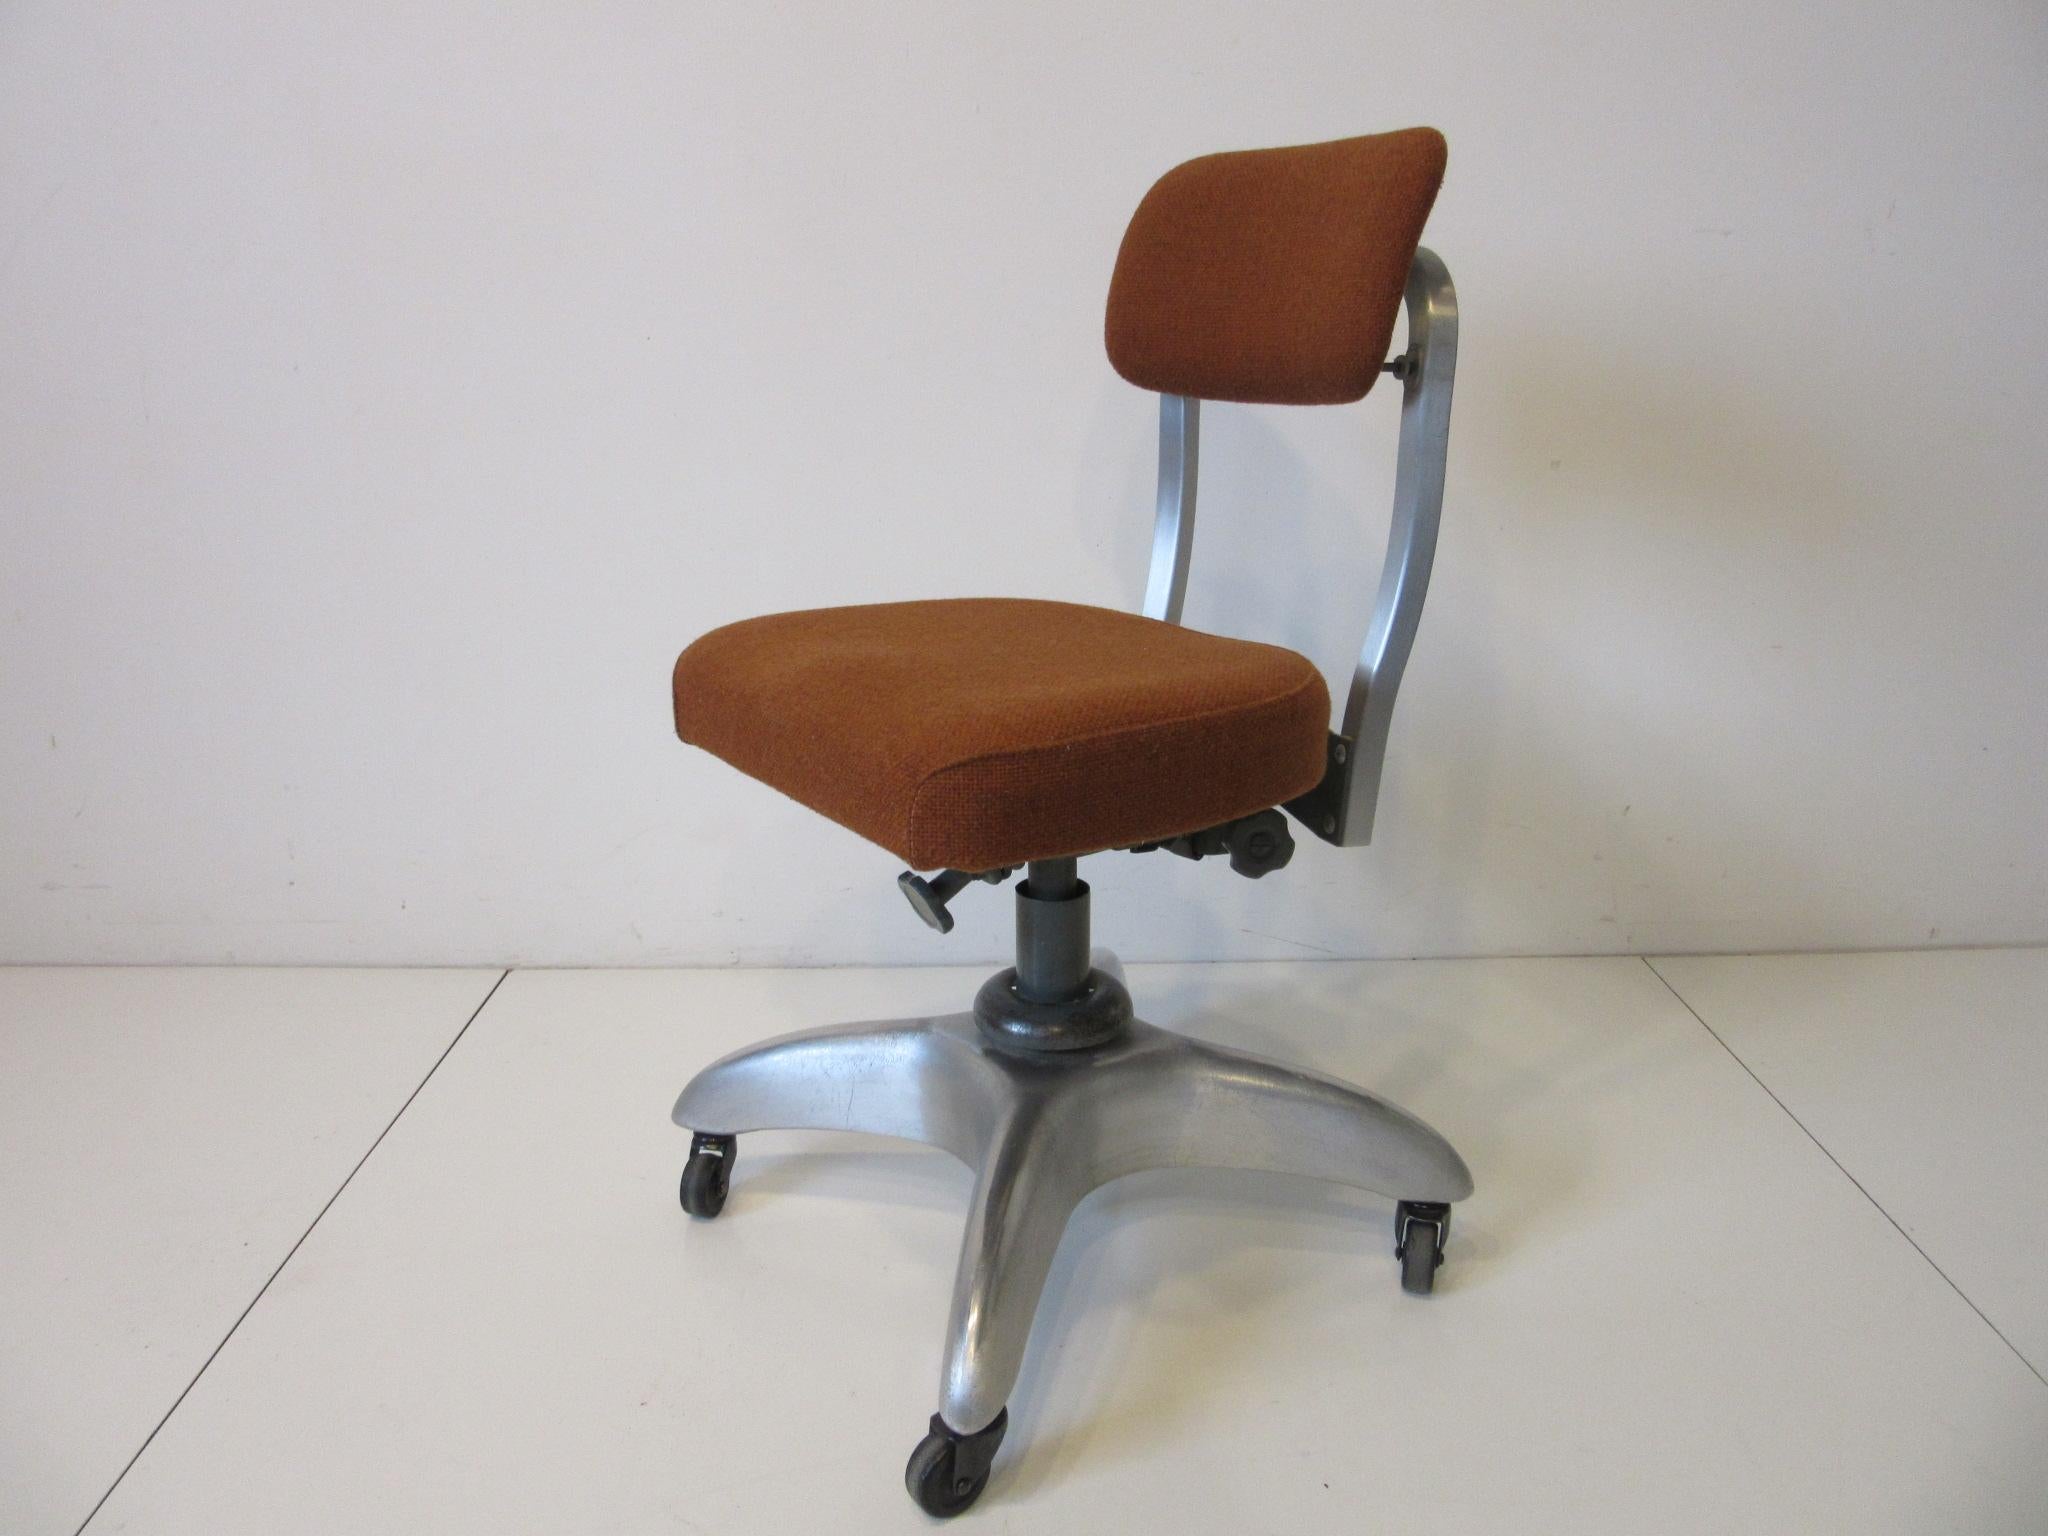 Aluminum Streamline / Industrial Desk Chair by General Fireproofing Co. For Sale